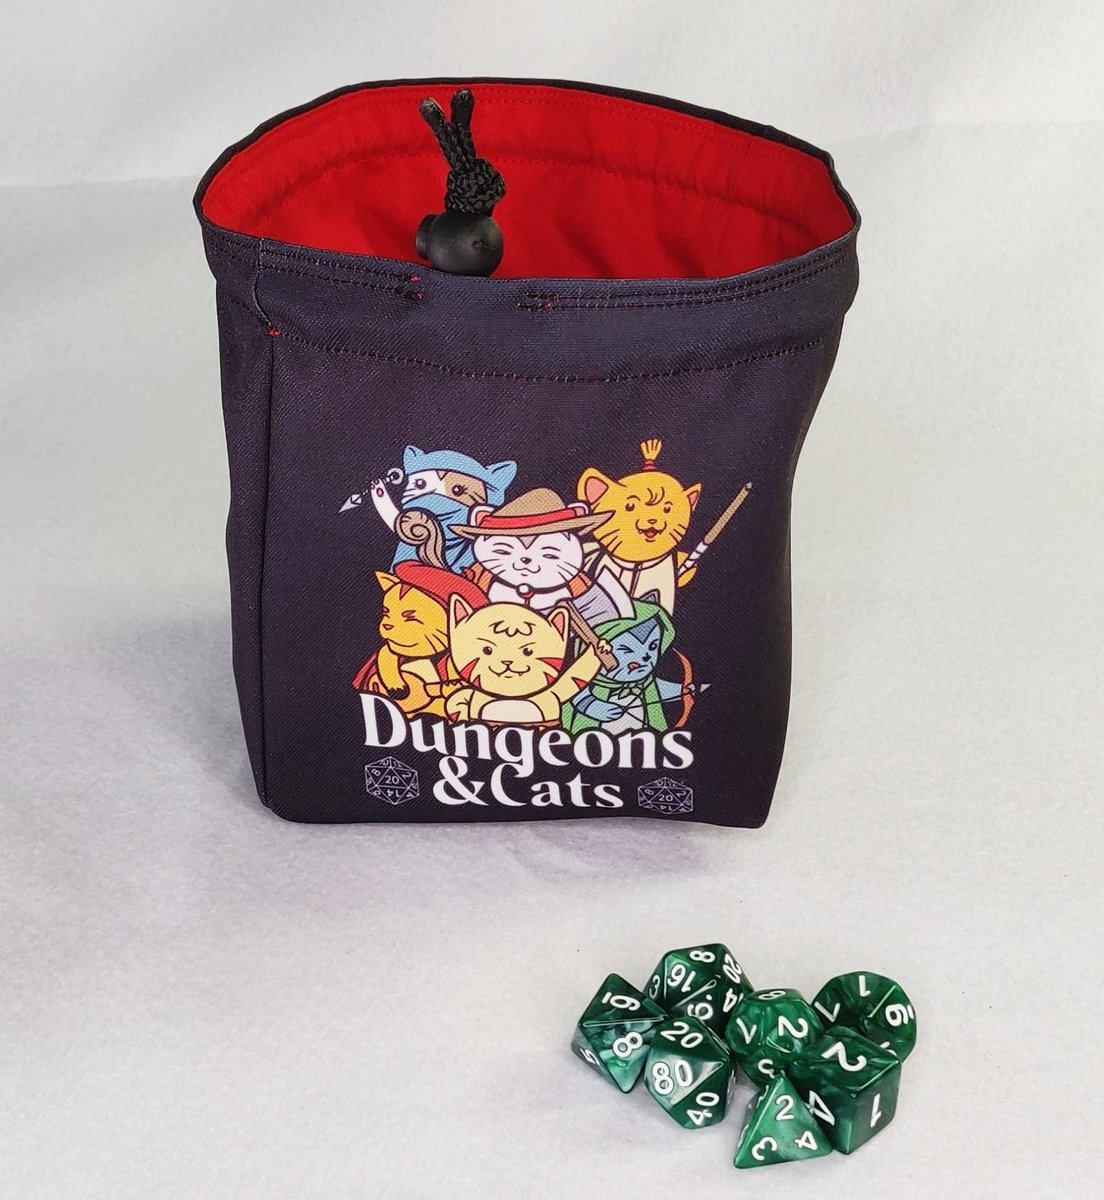 With the primary gifting period coming soon, it's to hear about our bags as gifts!

 ★★★★★ 'A great birthday gift for my daughter! A good size for several dice sets and lovely quality. Thank you!' K.

 #boardgames #tabletopgaming #dnd #gaming #ttrpg etsy.me/3fmOHlH